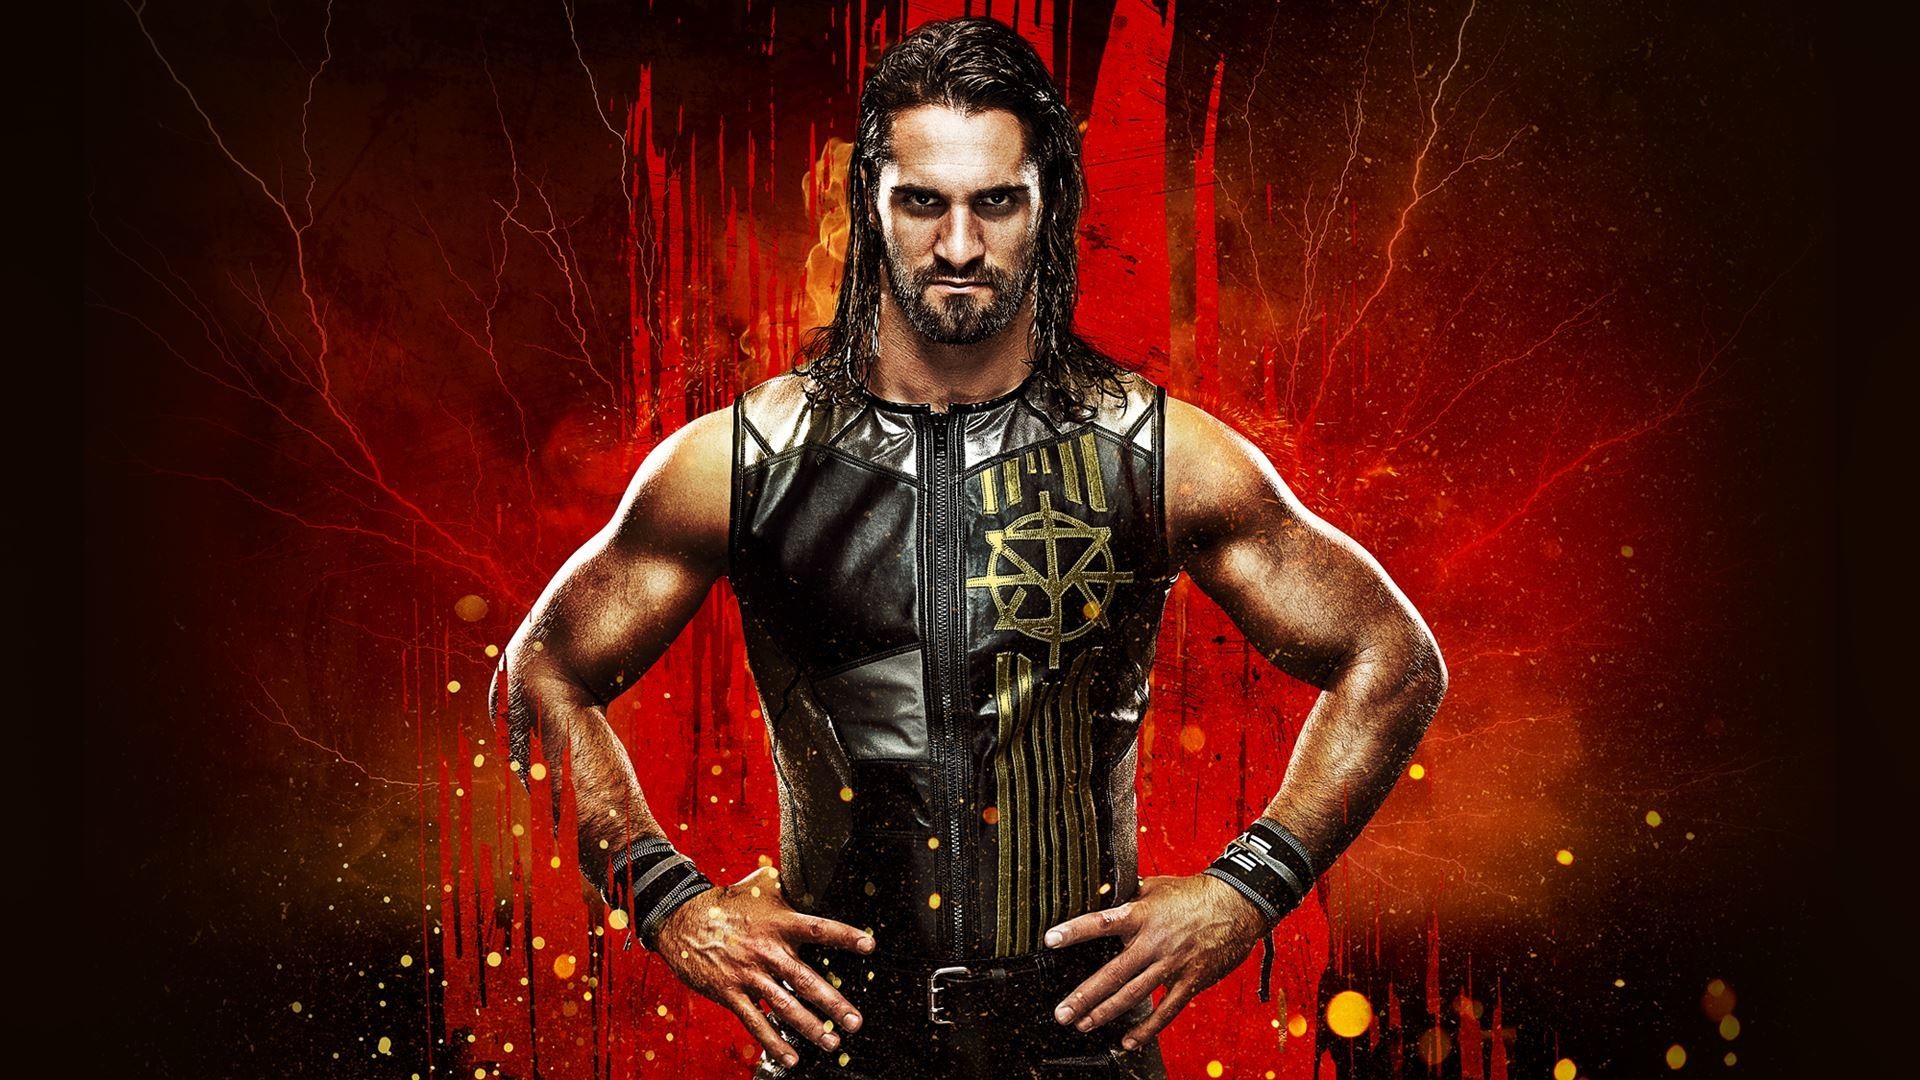 1920x1080 raw seth rollins picture image